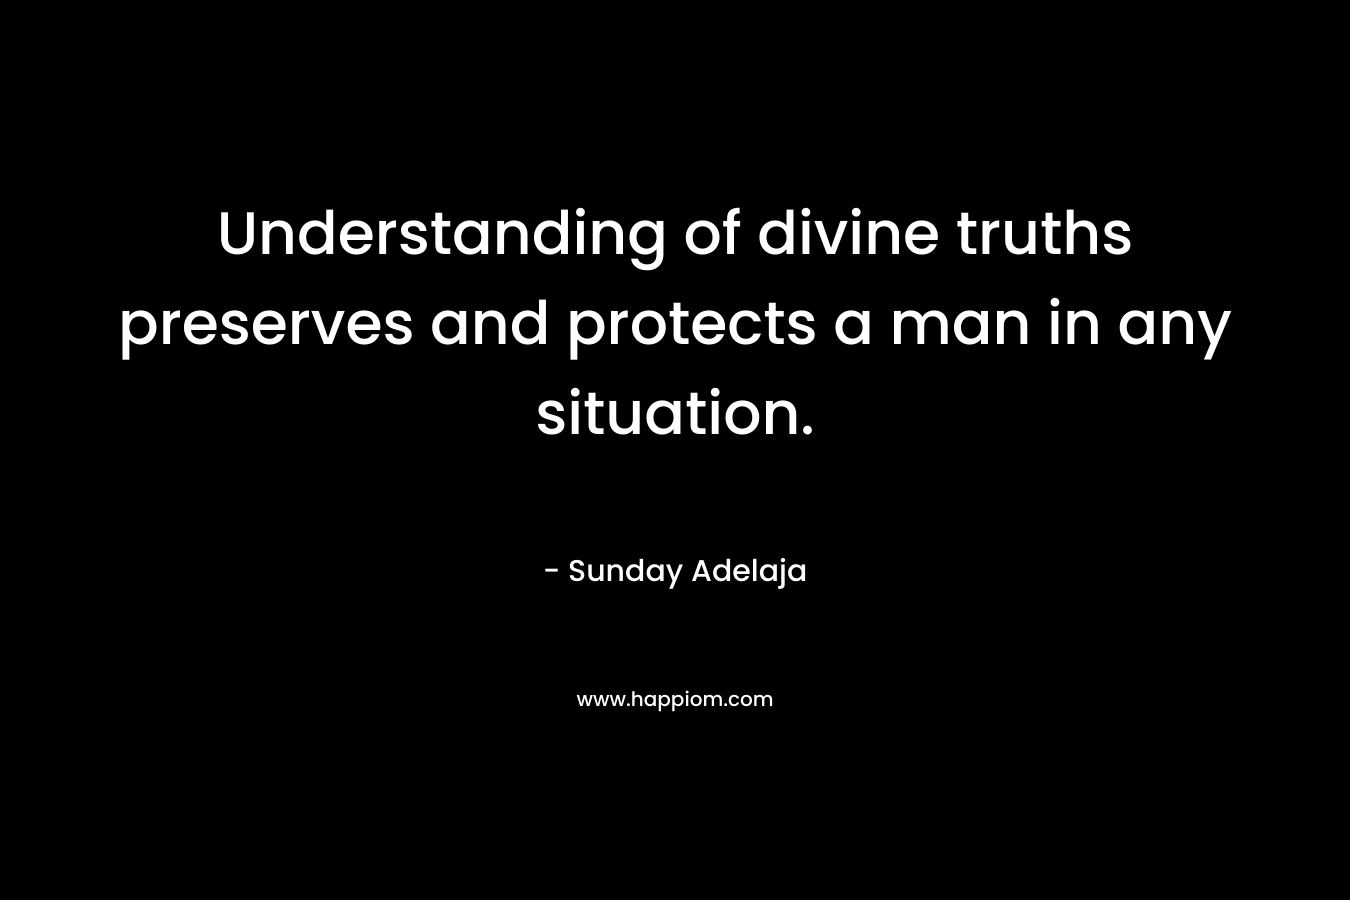 Understanding of divine truths preserves and protects a man in any situation.